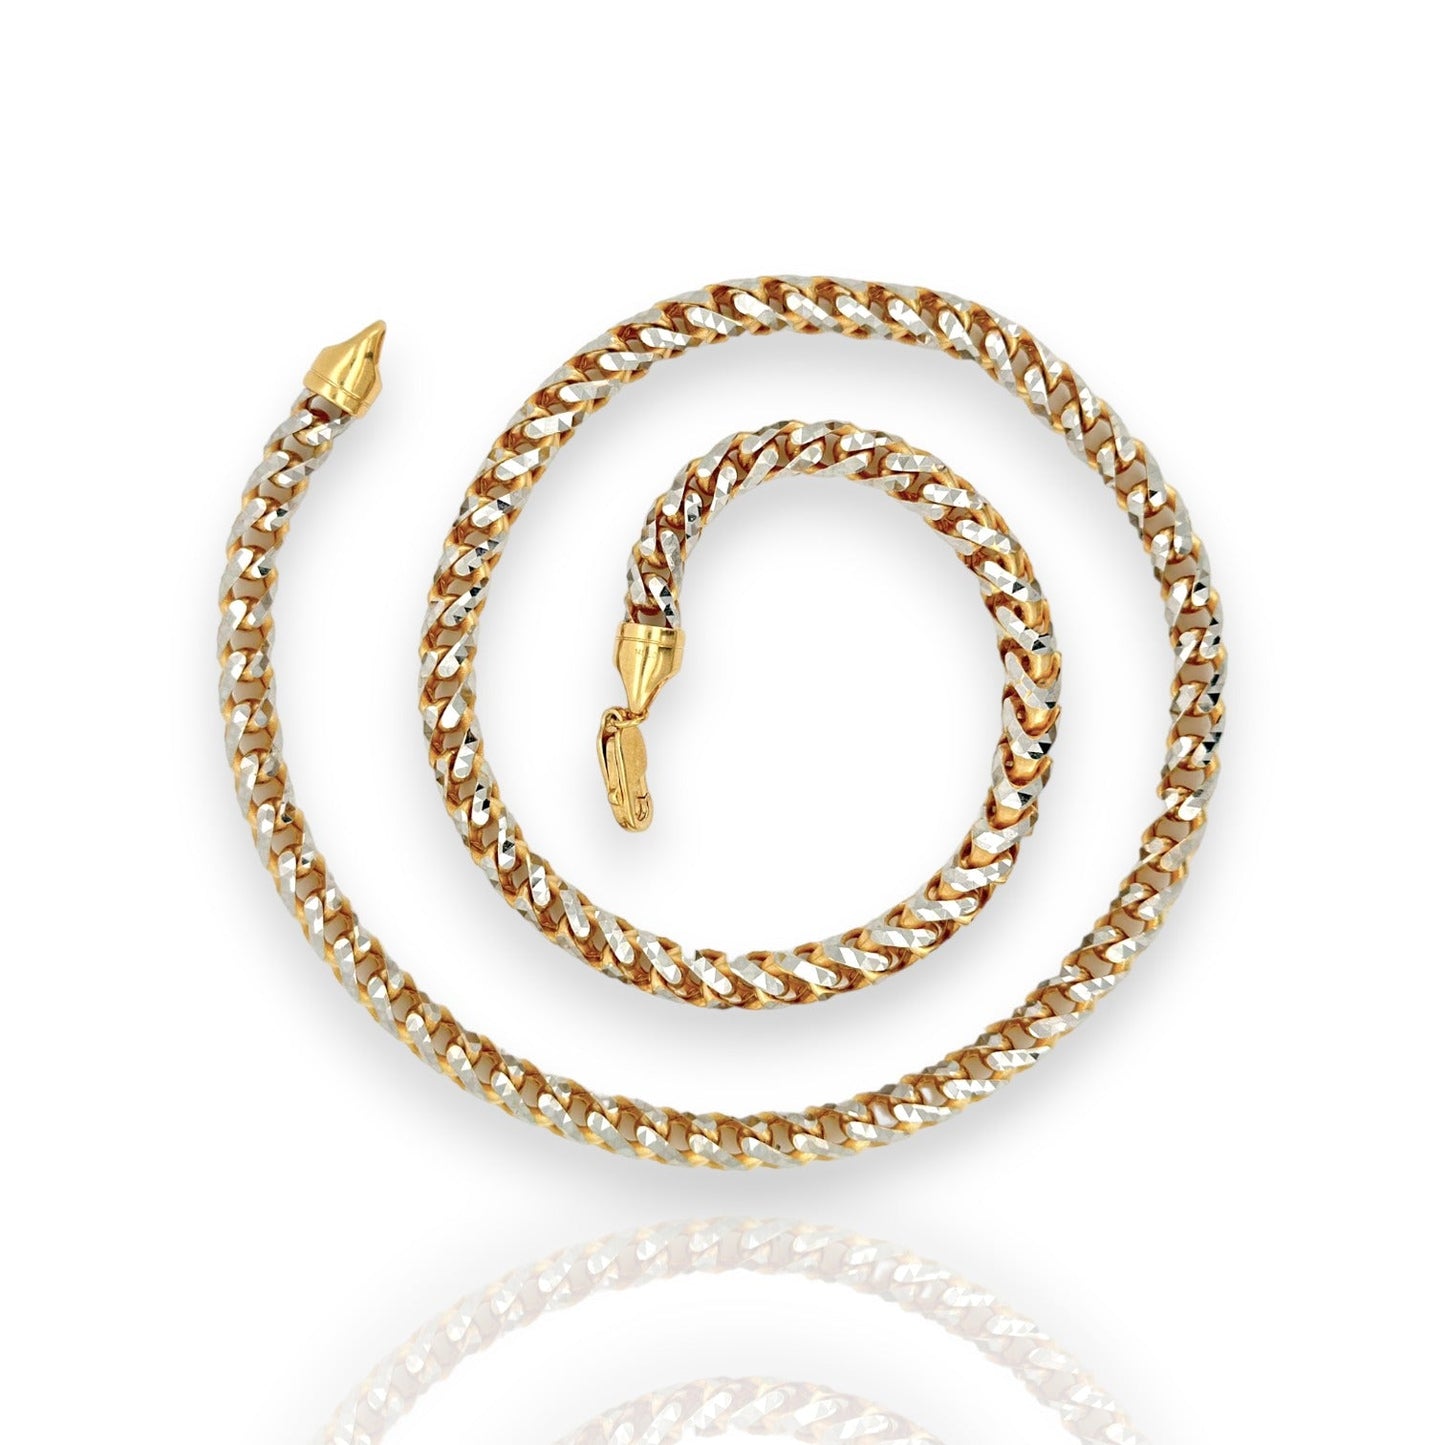 Round Franco Box Chain Necklace - 14K Two Tone Yellow Pave Gold - Solid